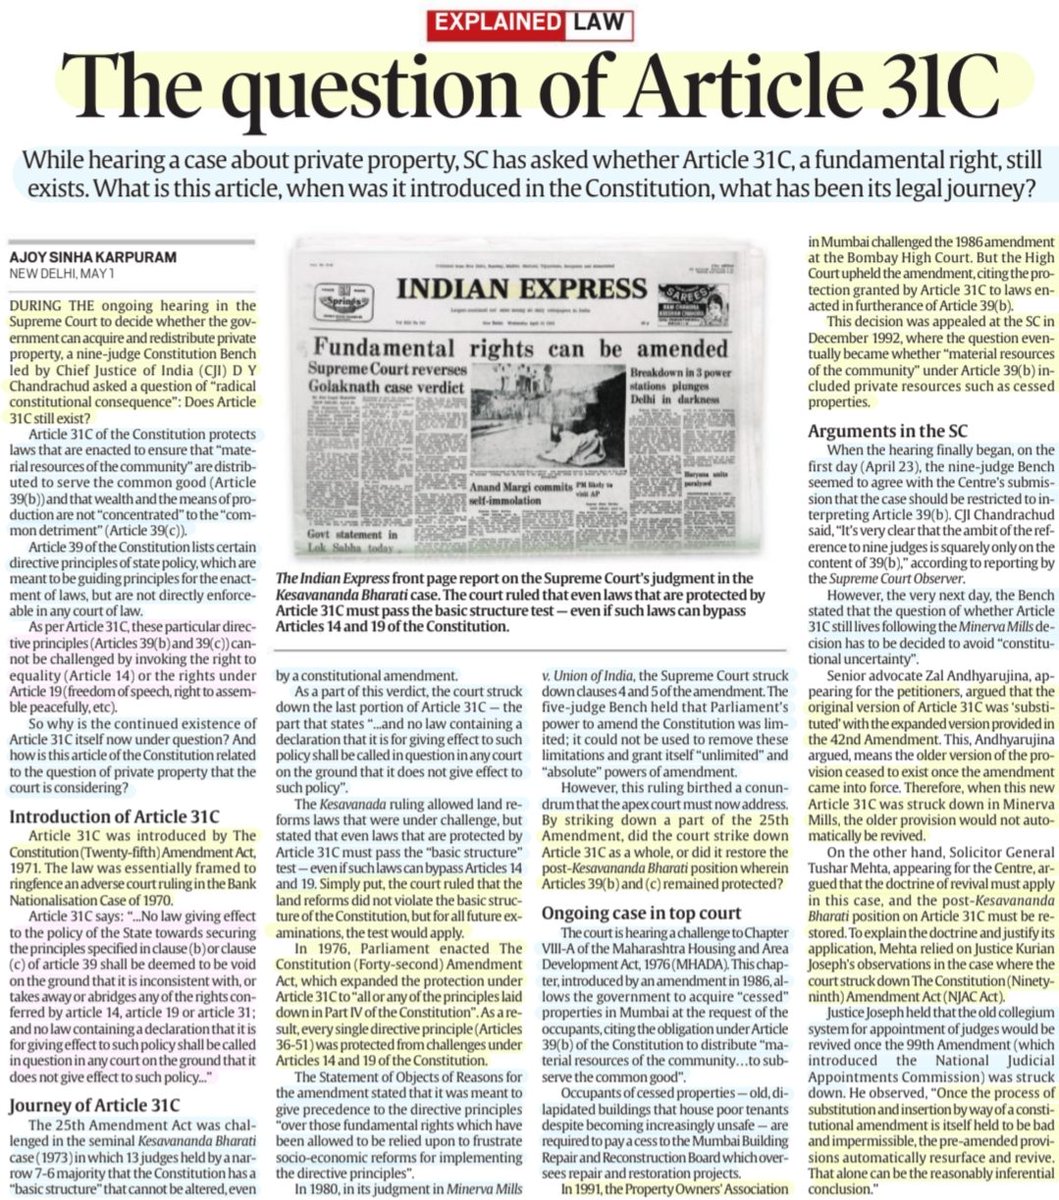 'The Question of Article 31 C' :Well Explained by Sh Ajoy Sinha Karpuram @AKarpuram Introduction & journey of Art 31C, #Constitución ammendments,Challenges #SupremeCourtOfIndia judgements, #Private property- #community resources & More info.. #Article31C #Polity #UPSC